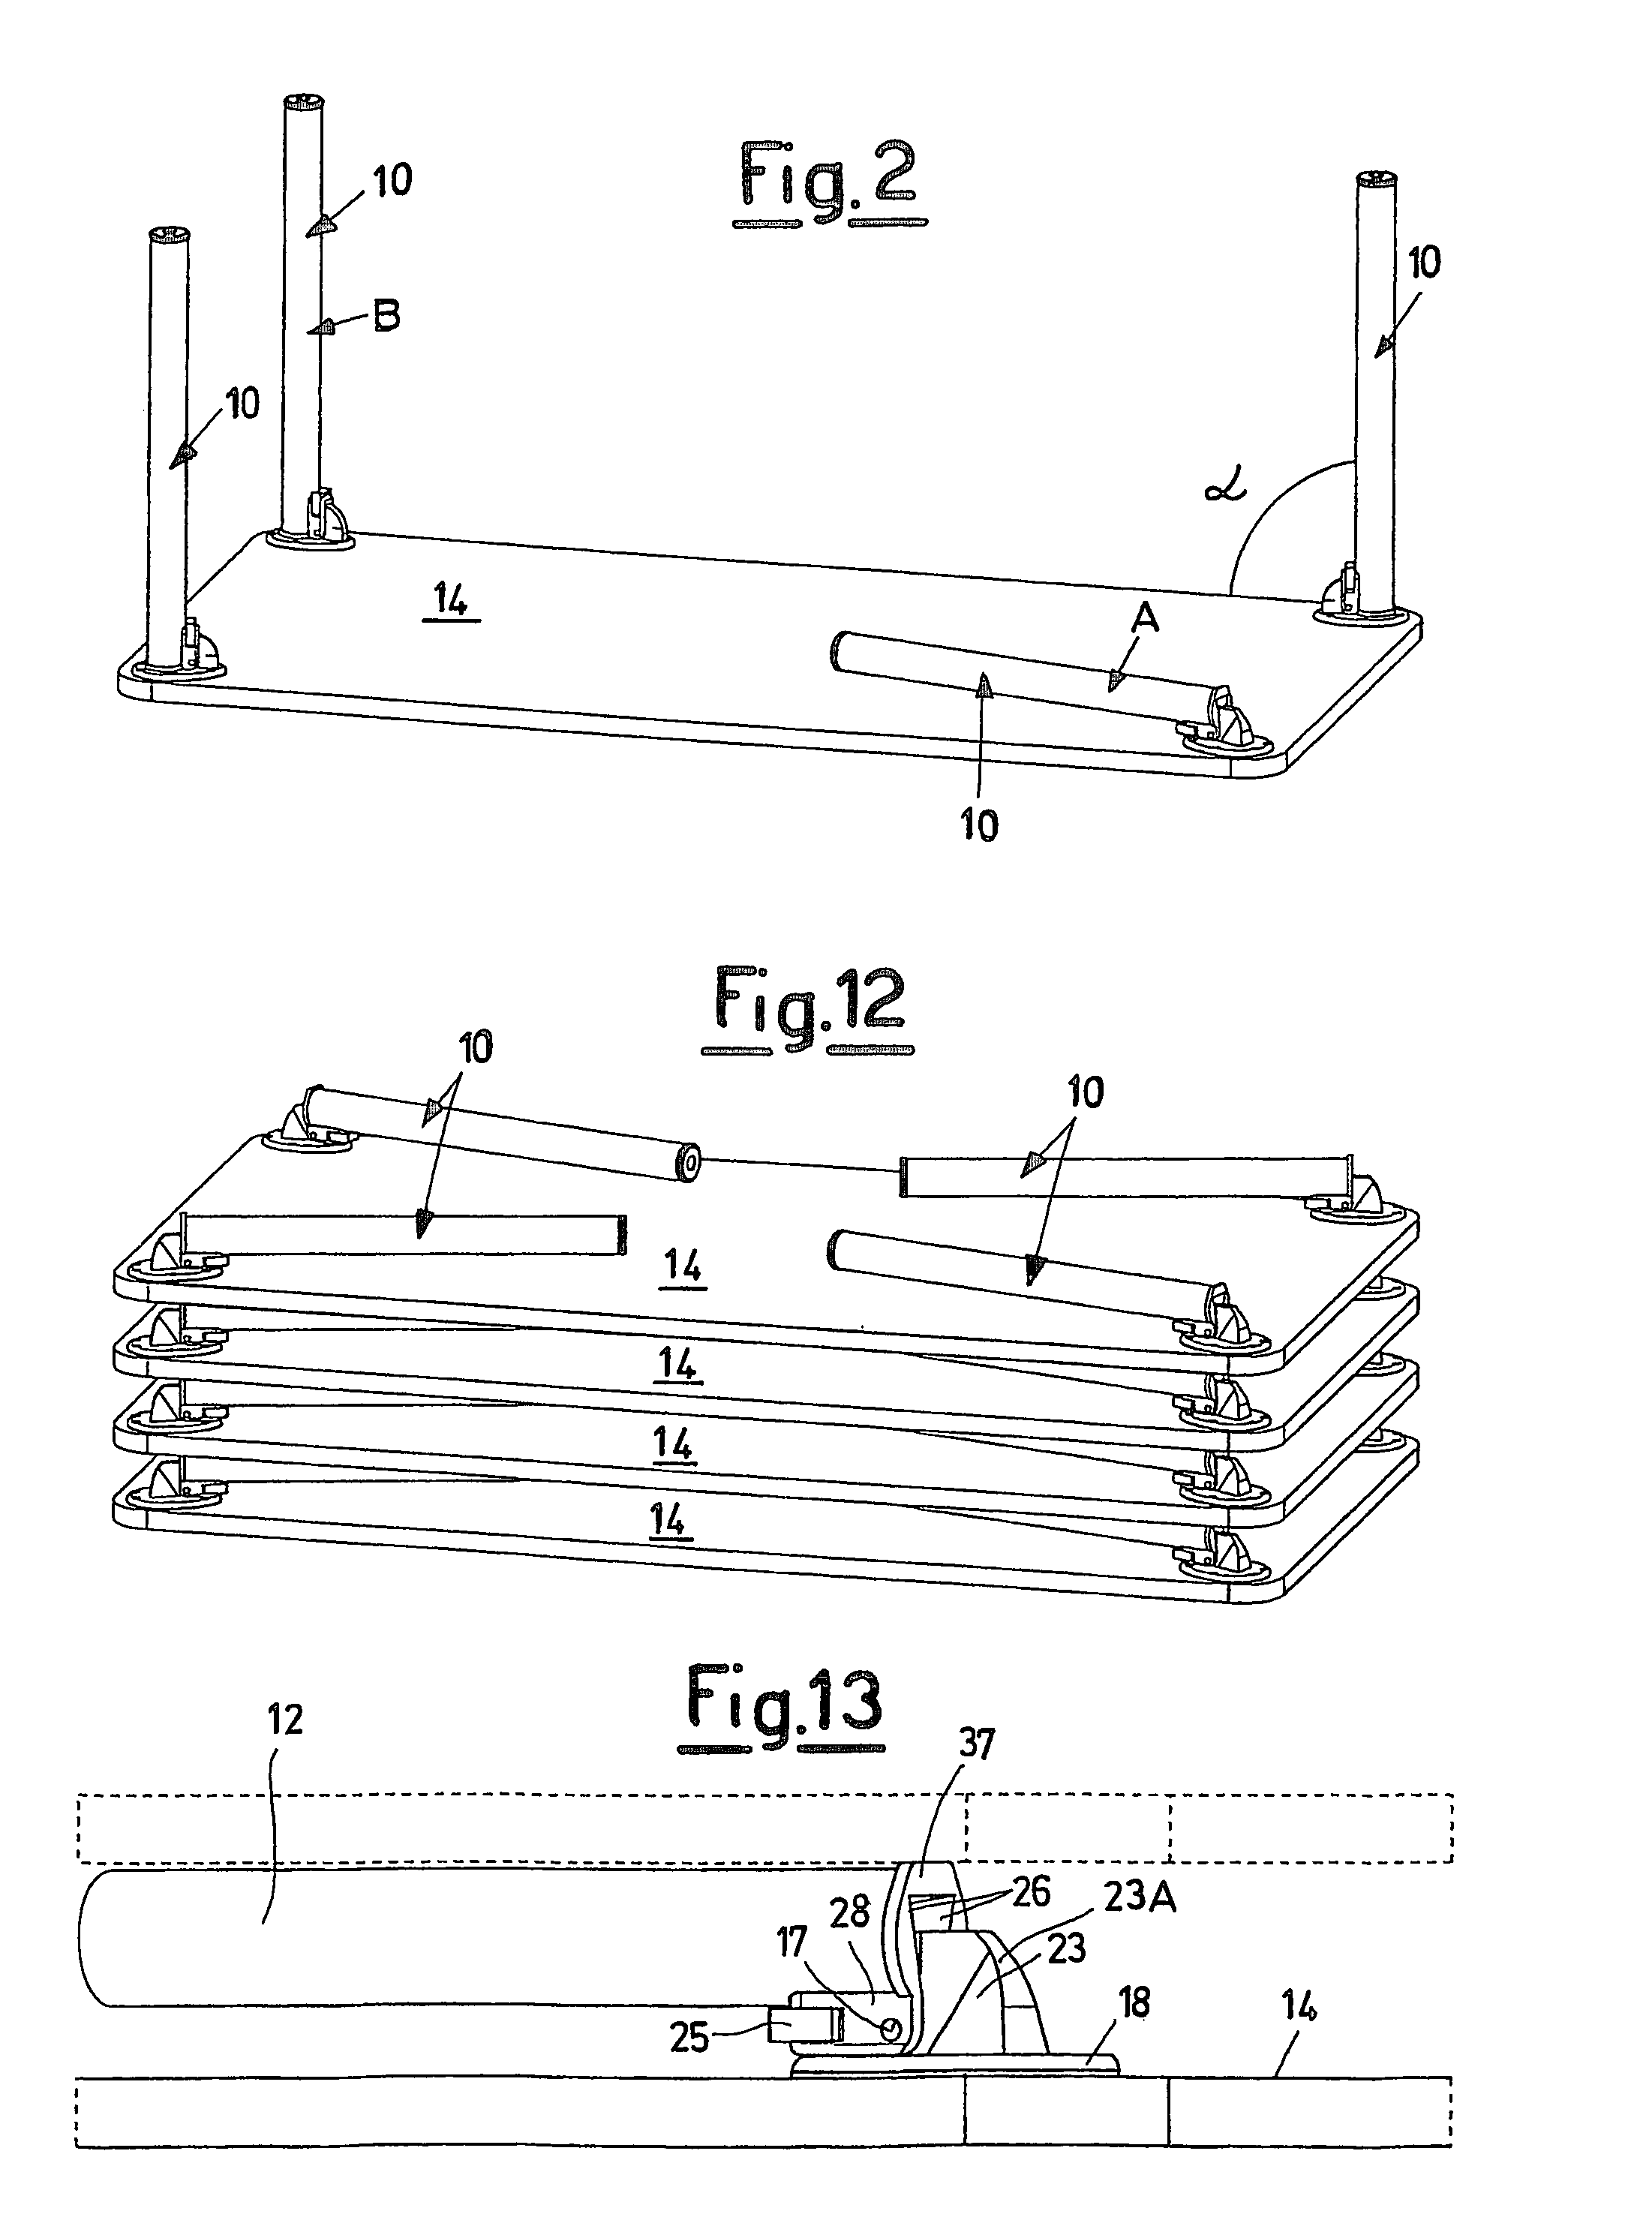 Fold-away legs for support surfaces